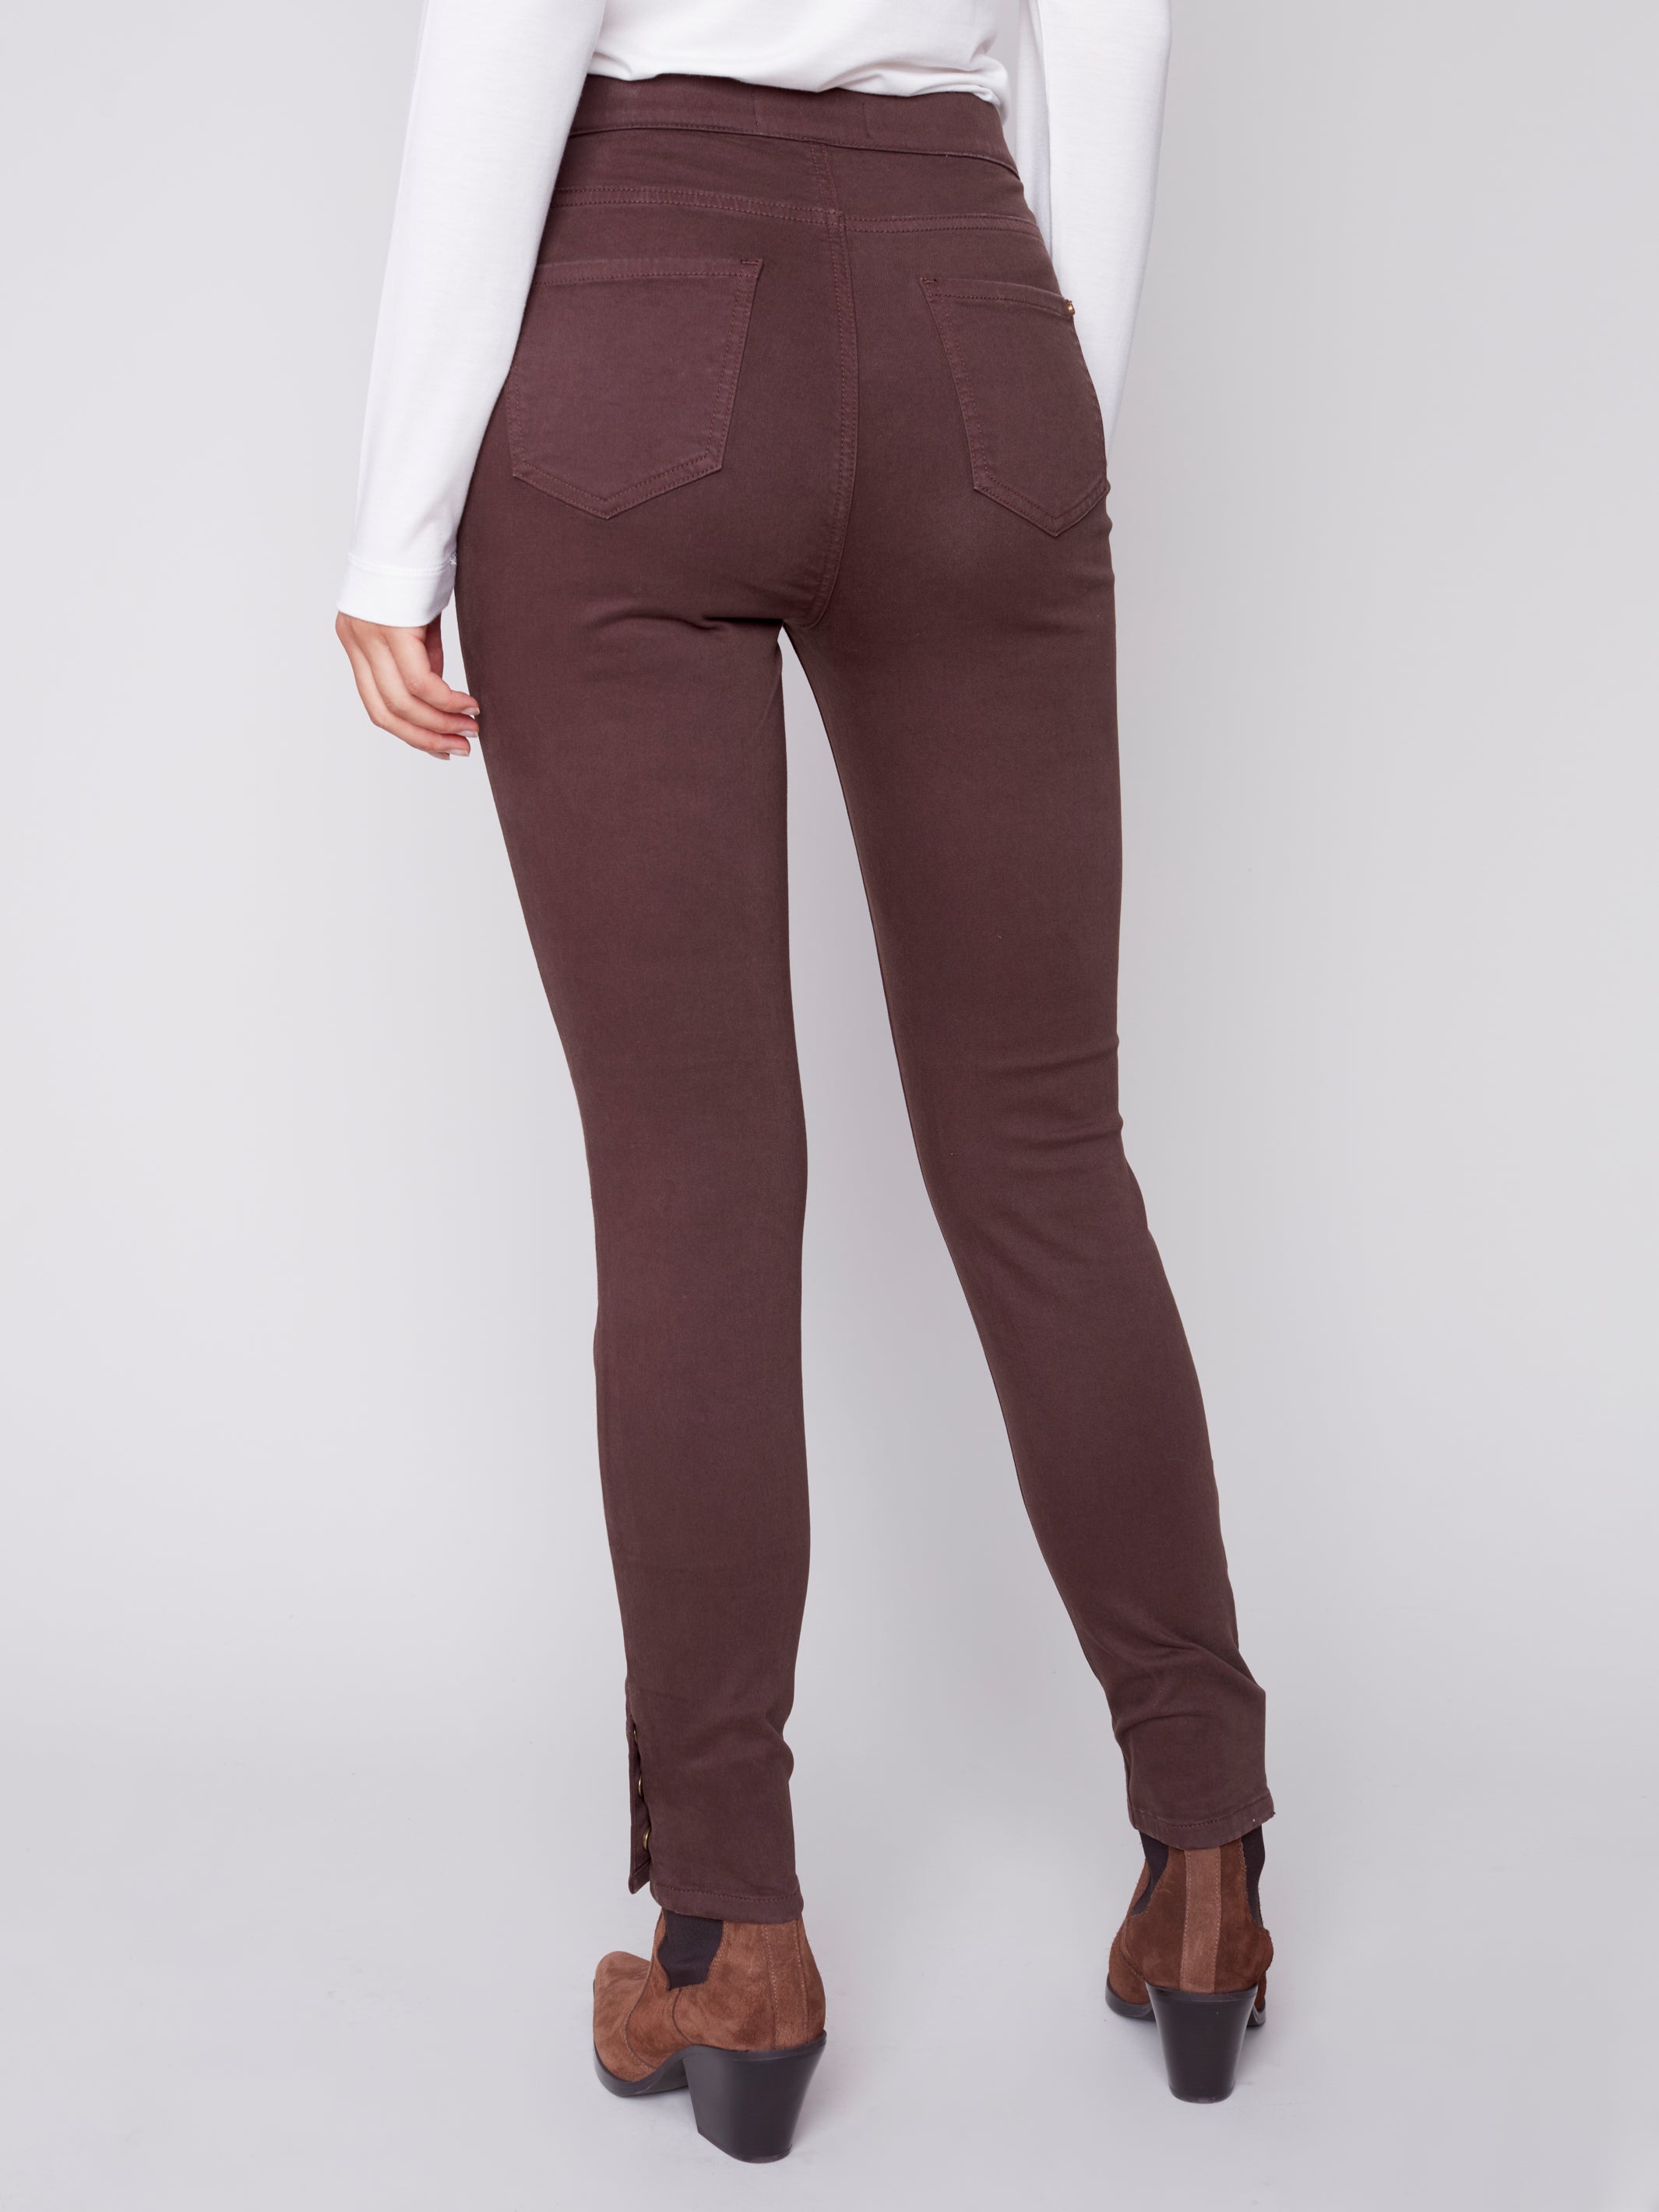 Bottom Snap Pull On Pant C5302RR/618A 093